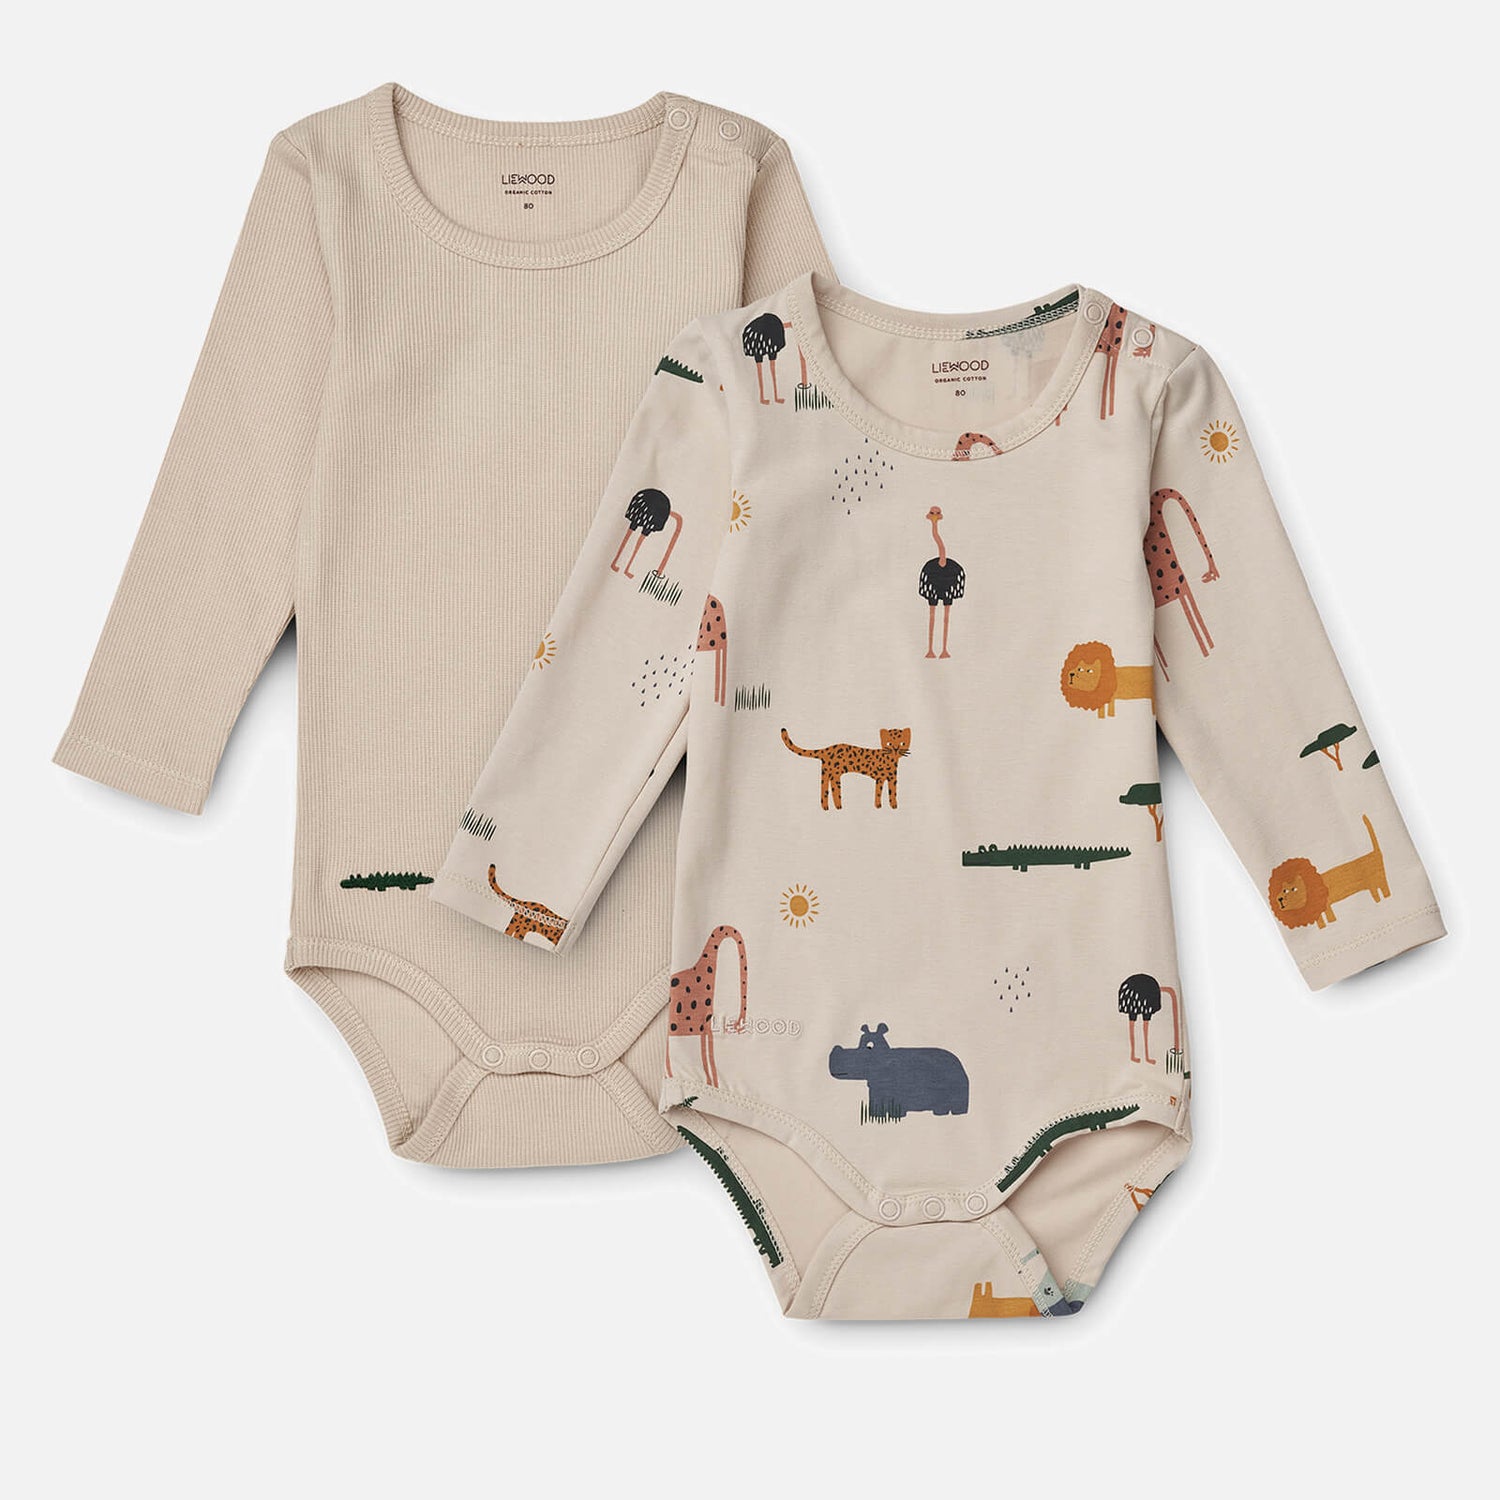 Liewood Baby Yanni Two-Pack Cotton-Blend Bodysuits - 12-18 months